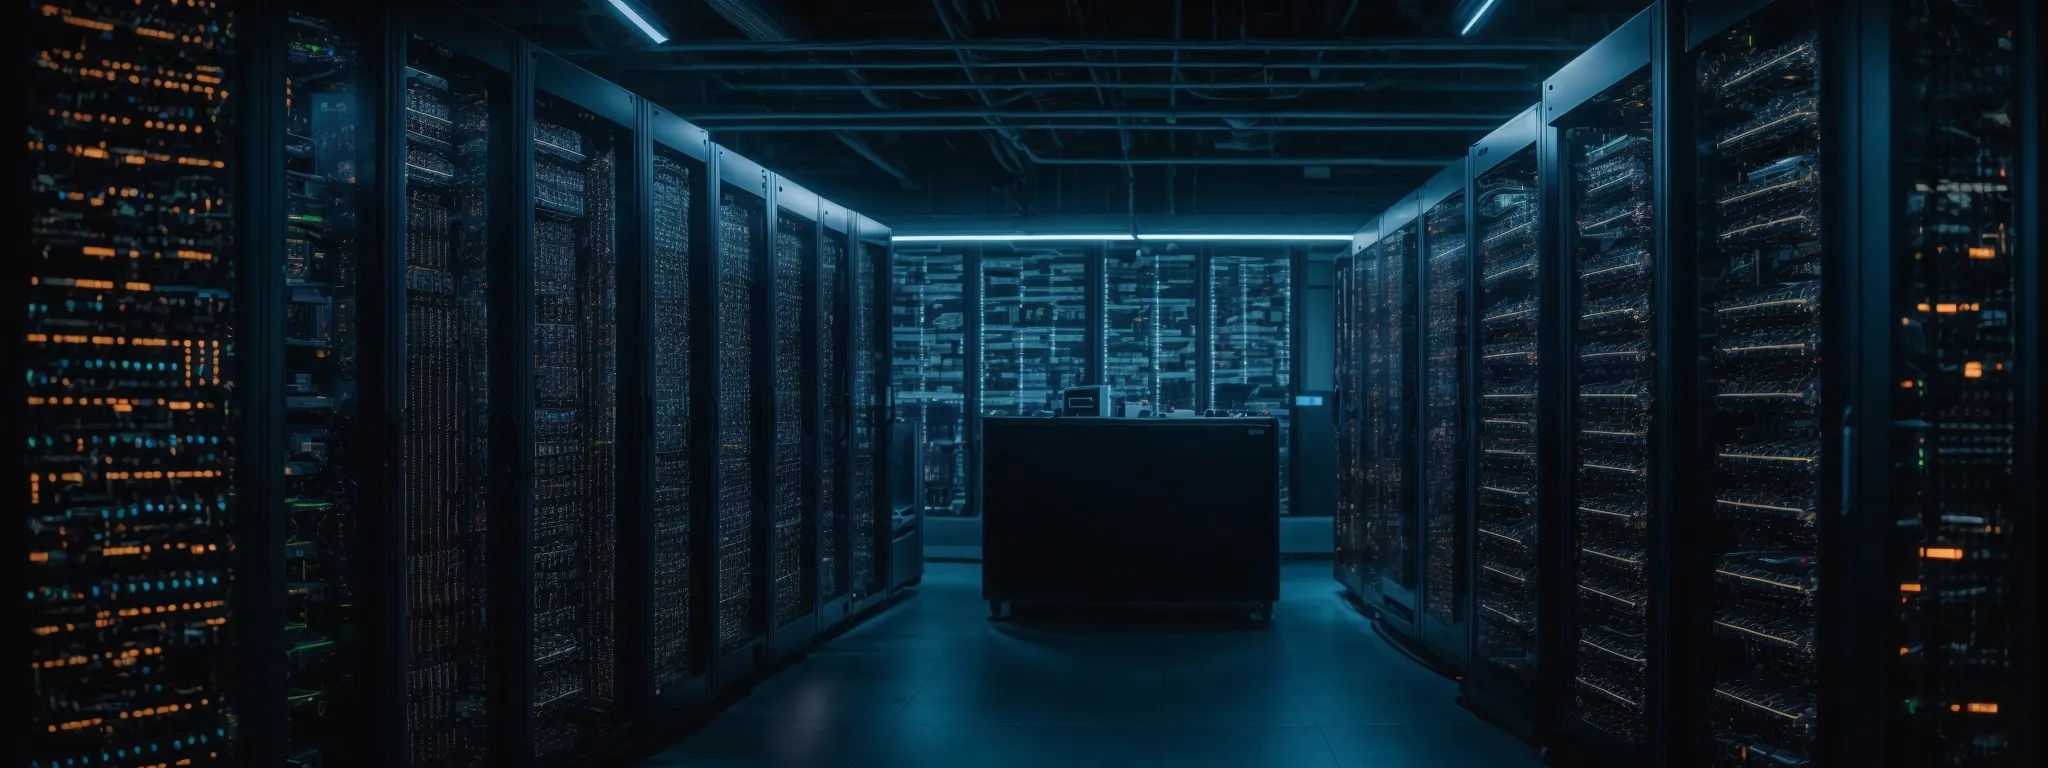 a server room with rows of computers and blinking lights, symbolizing data processing and machine learning algorithms at work.